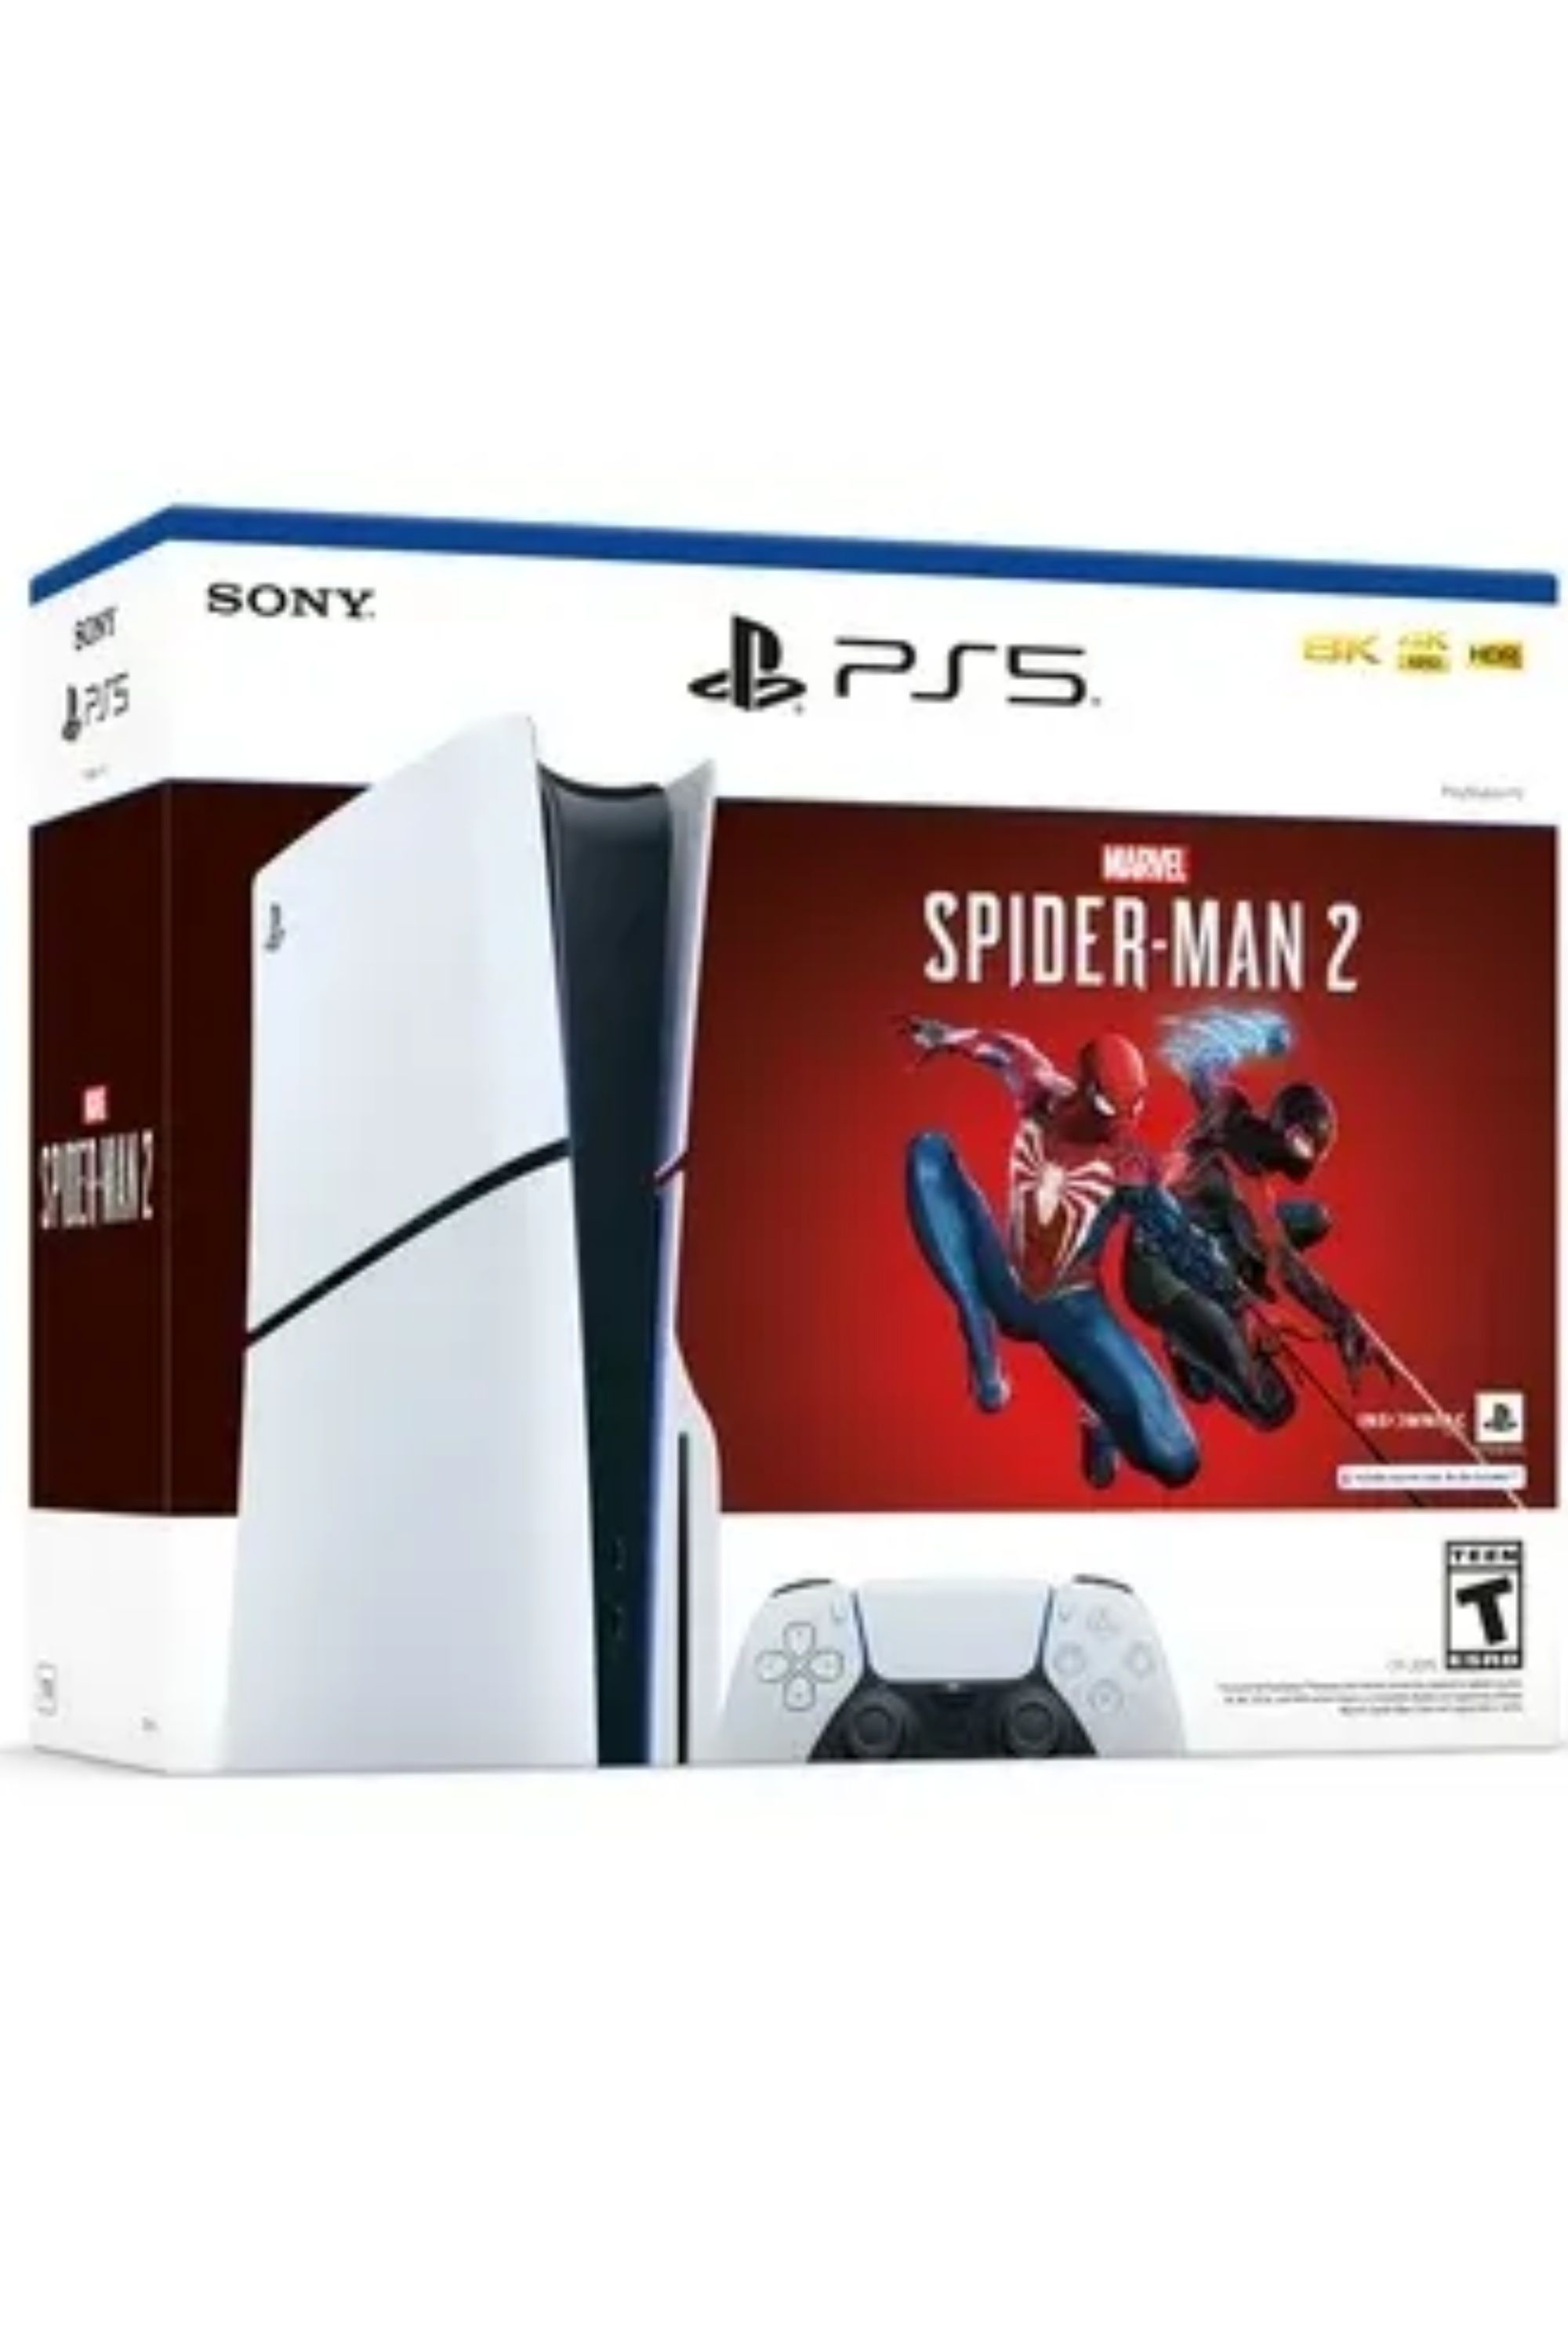 ps5 spider-man 2 bundle in the box